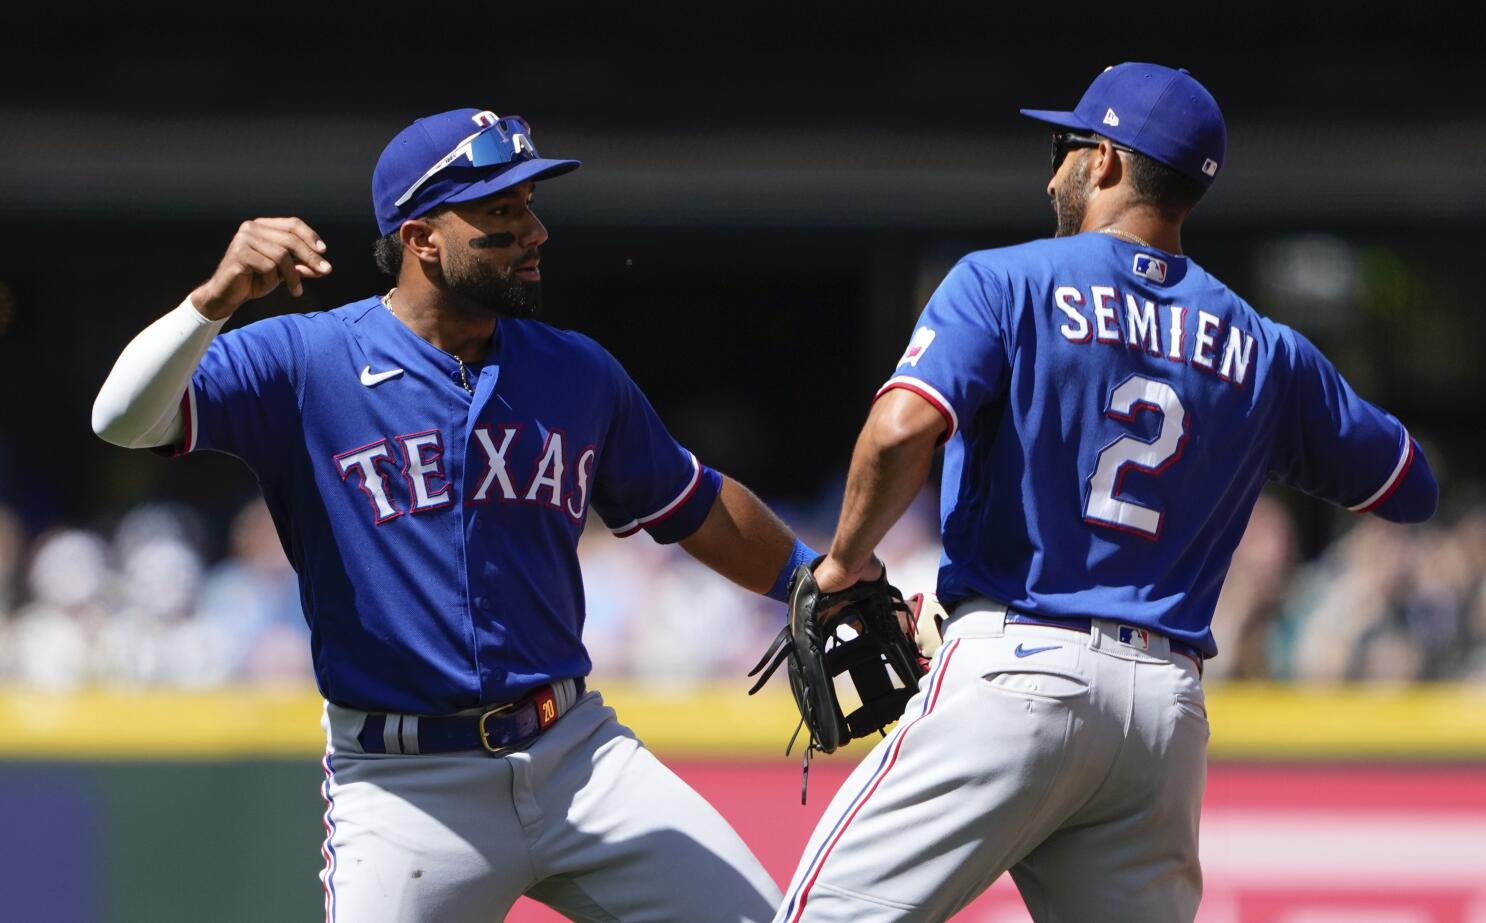 It's just one game': Rangers drop ALDS opener 10-1 to Blue Jays